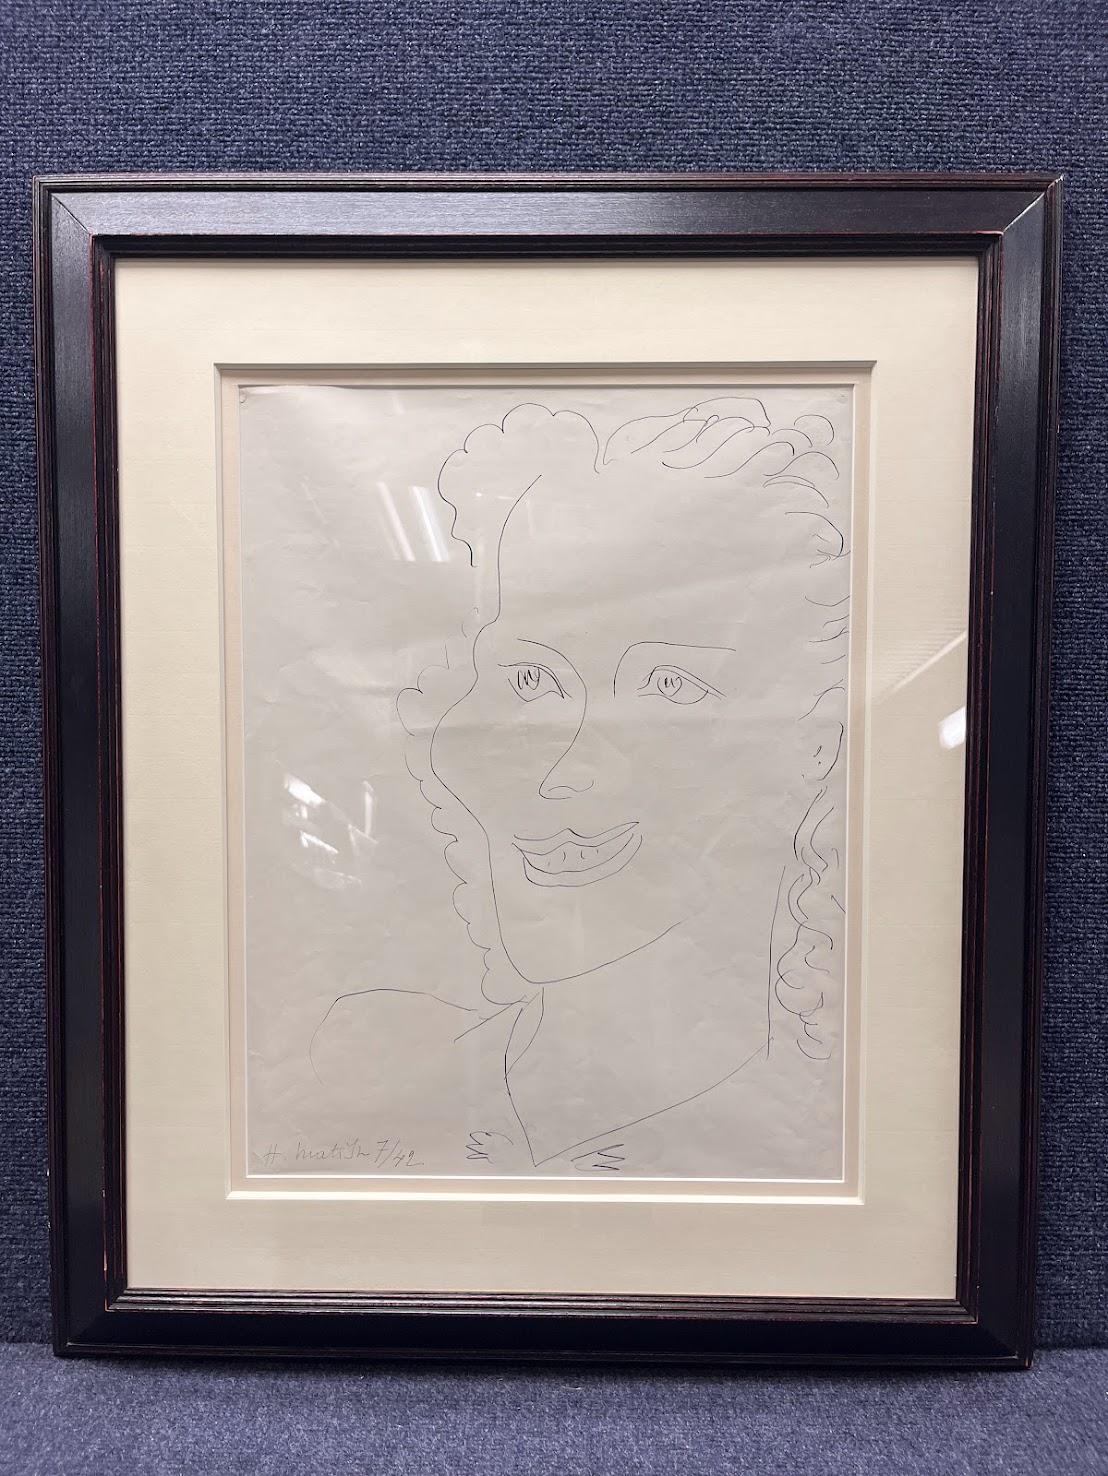 This beautiful Henri Matisse Drawing 'Femme souriante'' was conceived in July of 1942. It is in excellent condition, signed and dated 'H. Matisse 7/42.' on the lower left hand corner. The materials include India ink on paper.

Provenance: 
Galerie